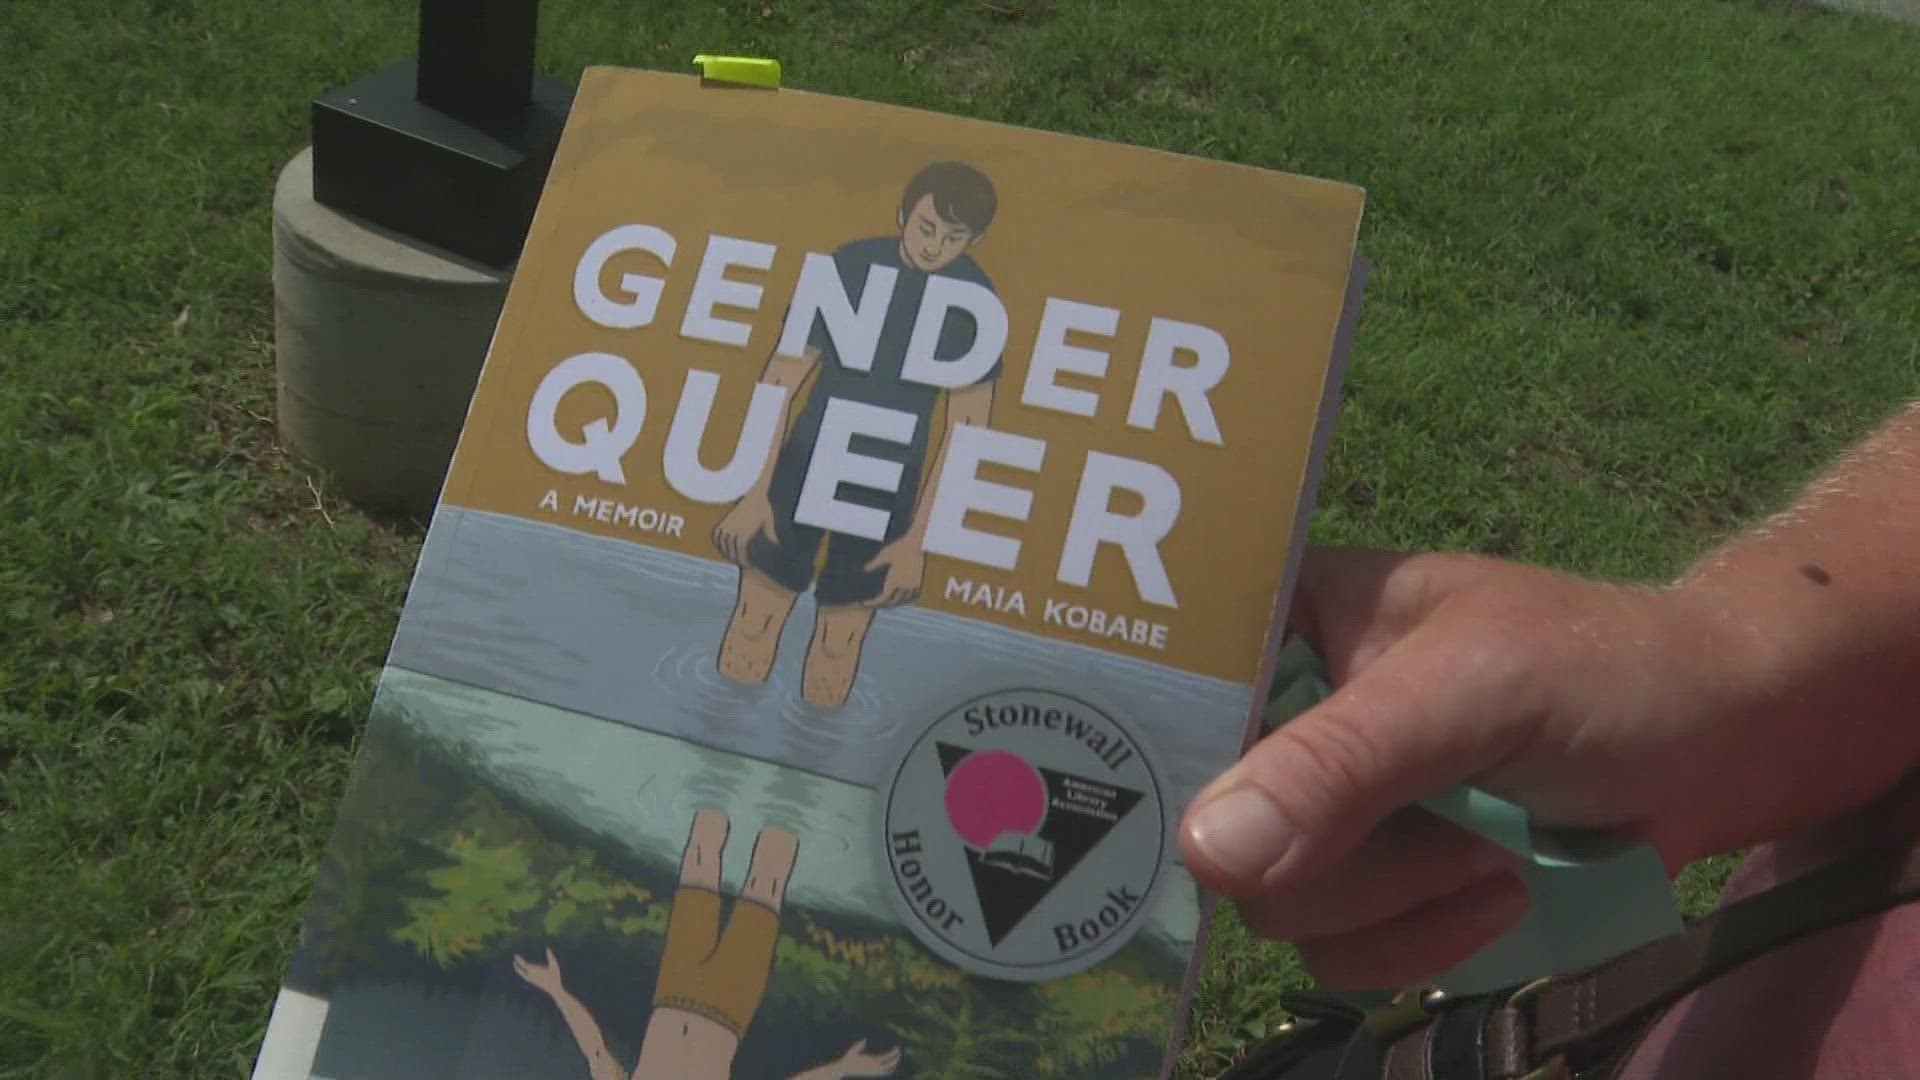 The book is called "Gender Queer." It's a memoir of the author's journey of self-identity, especially with their sexuality and gender.